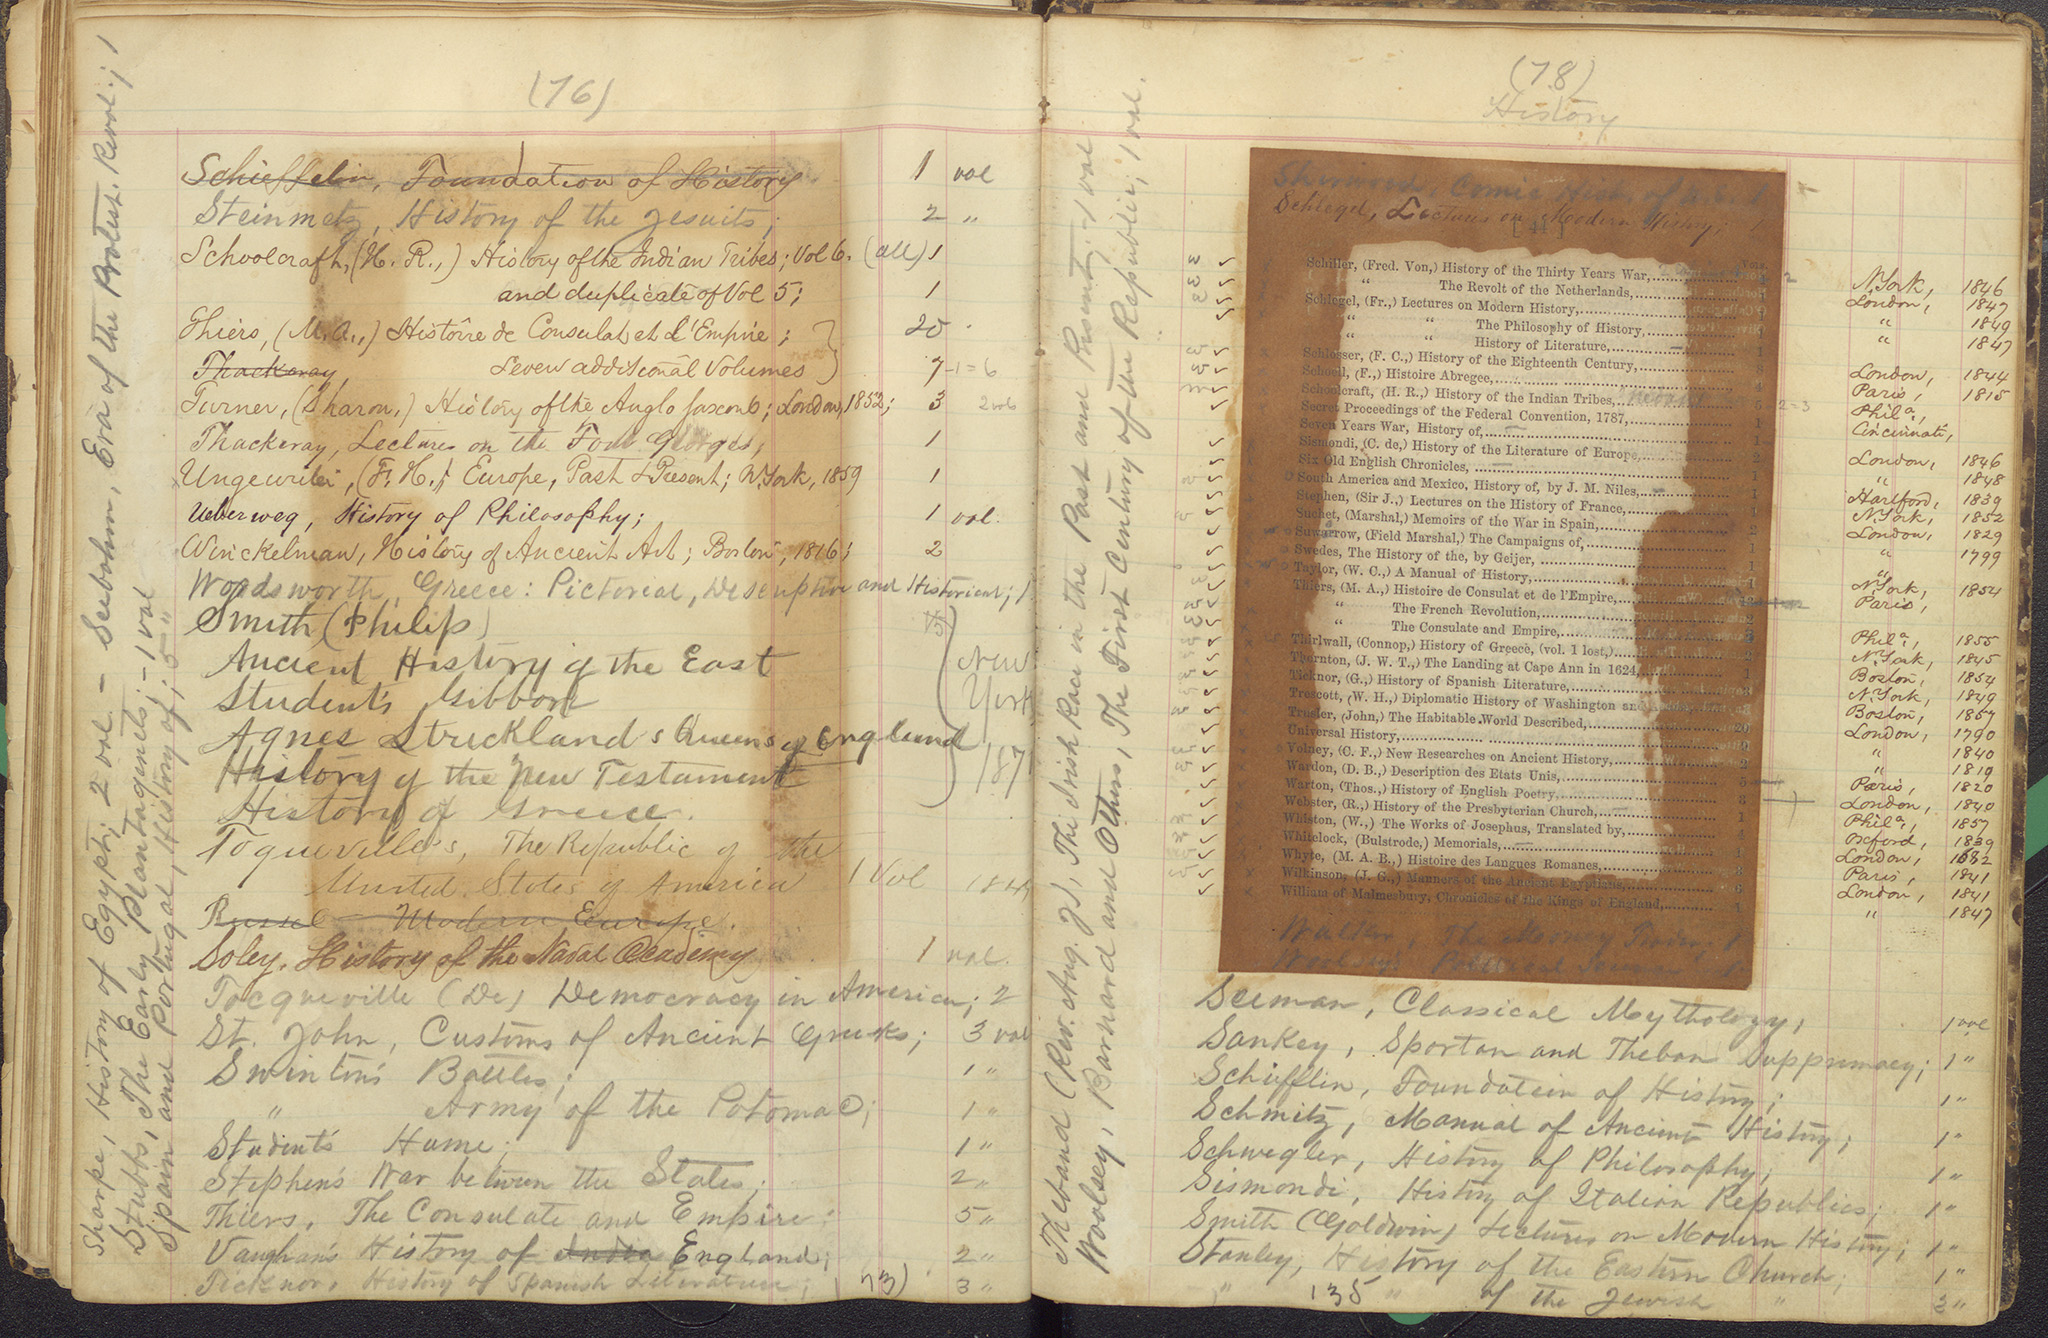 A ledger from 1868 is helping archivists identify which books are part of the university’s original library collection, 1849-1858. Photo courtesy Archives and Special Collections